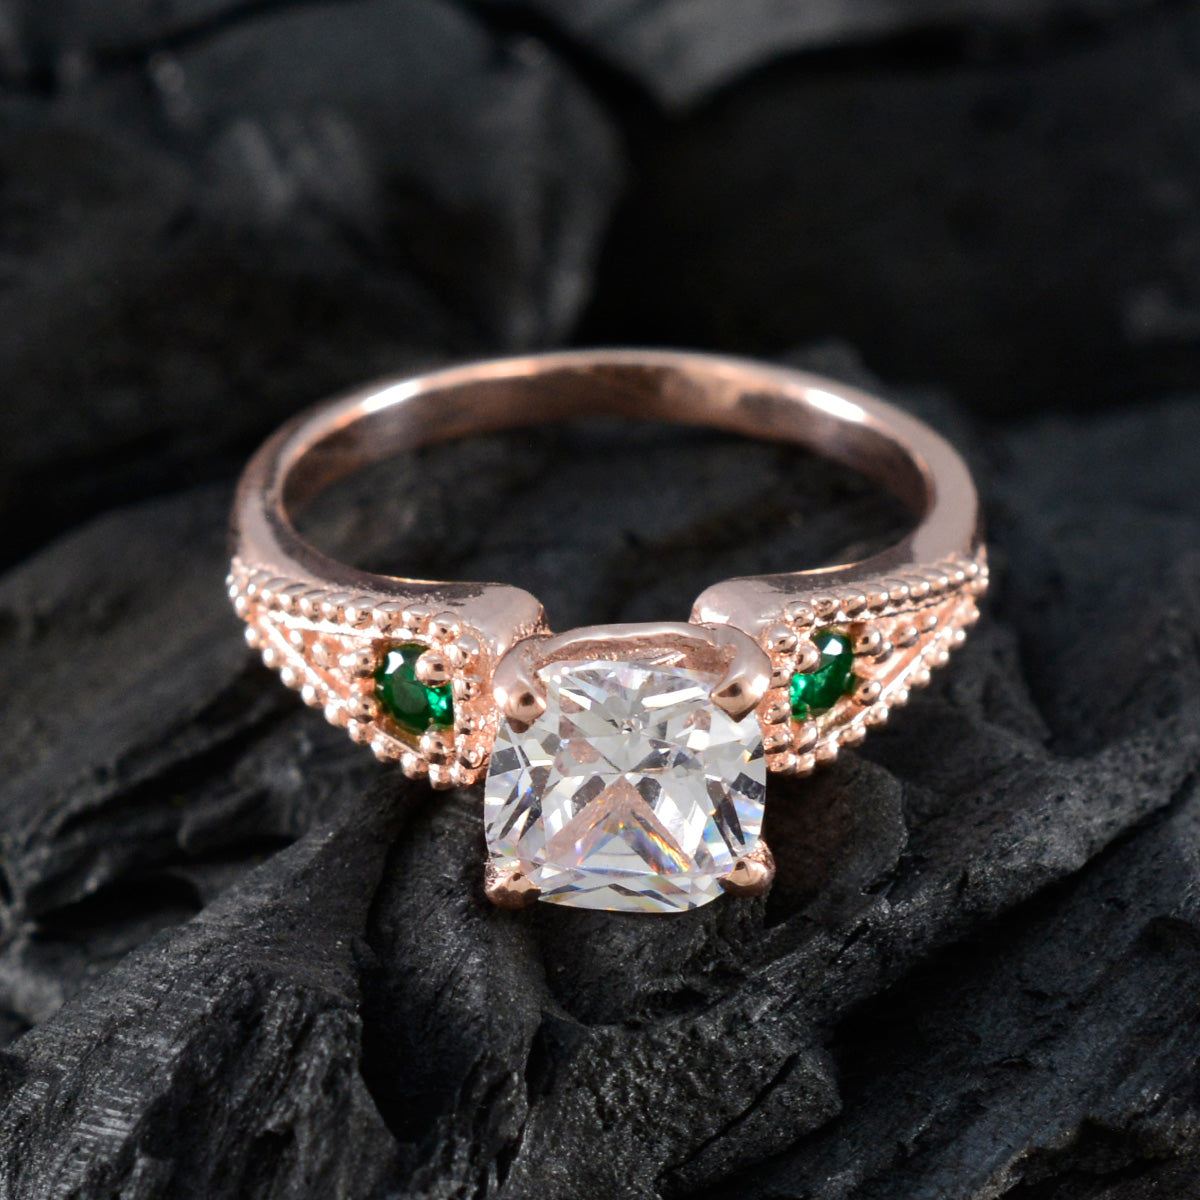 Riyo Desirable Silver Ring With Rose Gold Plating Emerald CZ Stone Cushion Shape Prong Setting Bridal Jewelry Valentines Day Ring